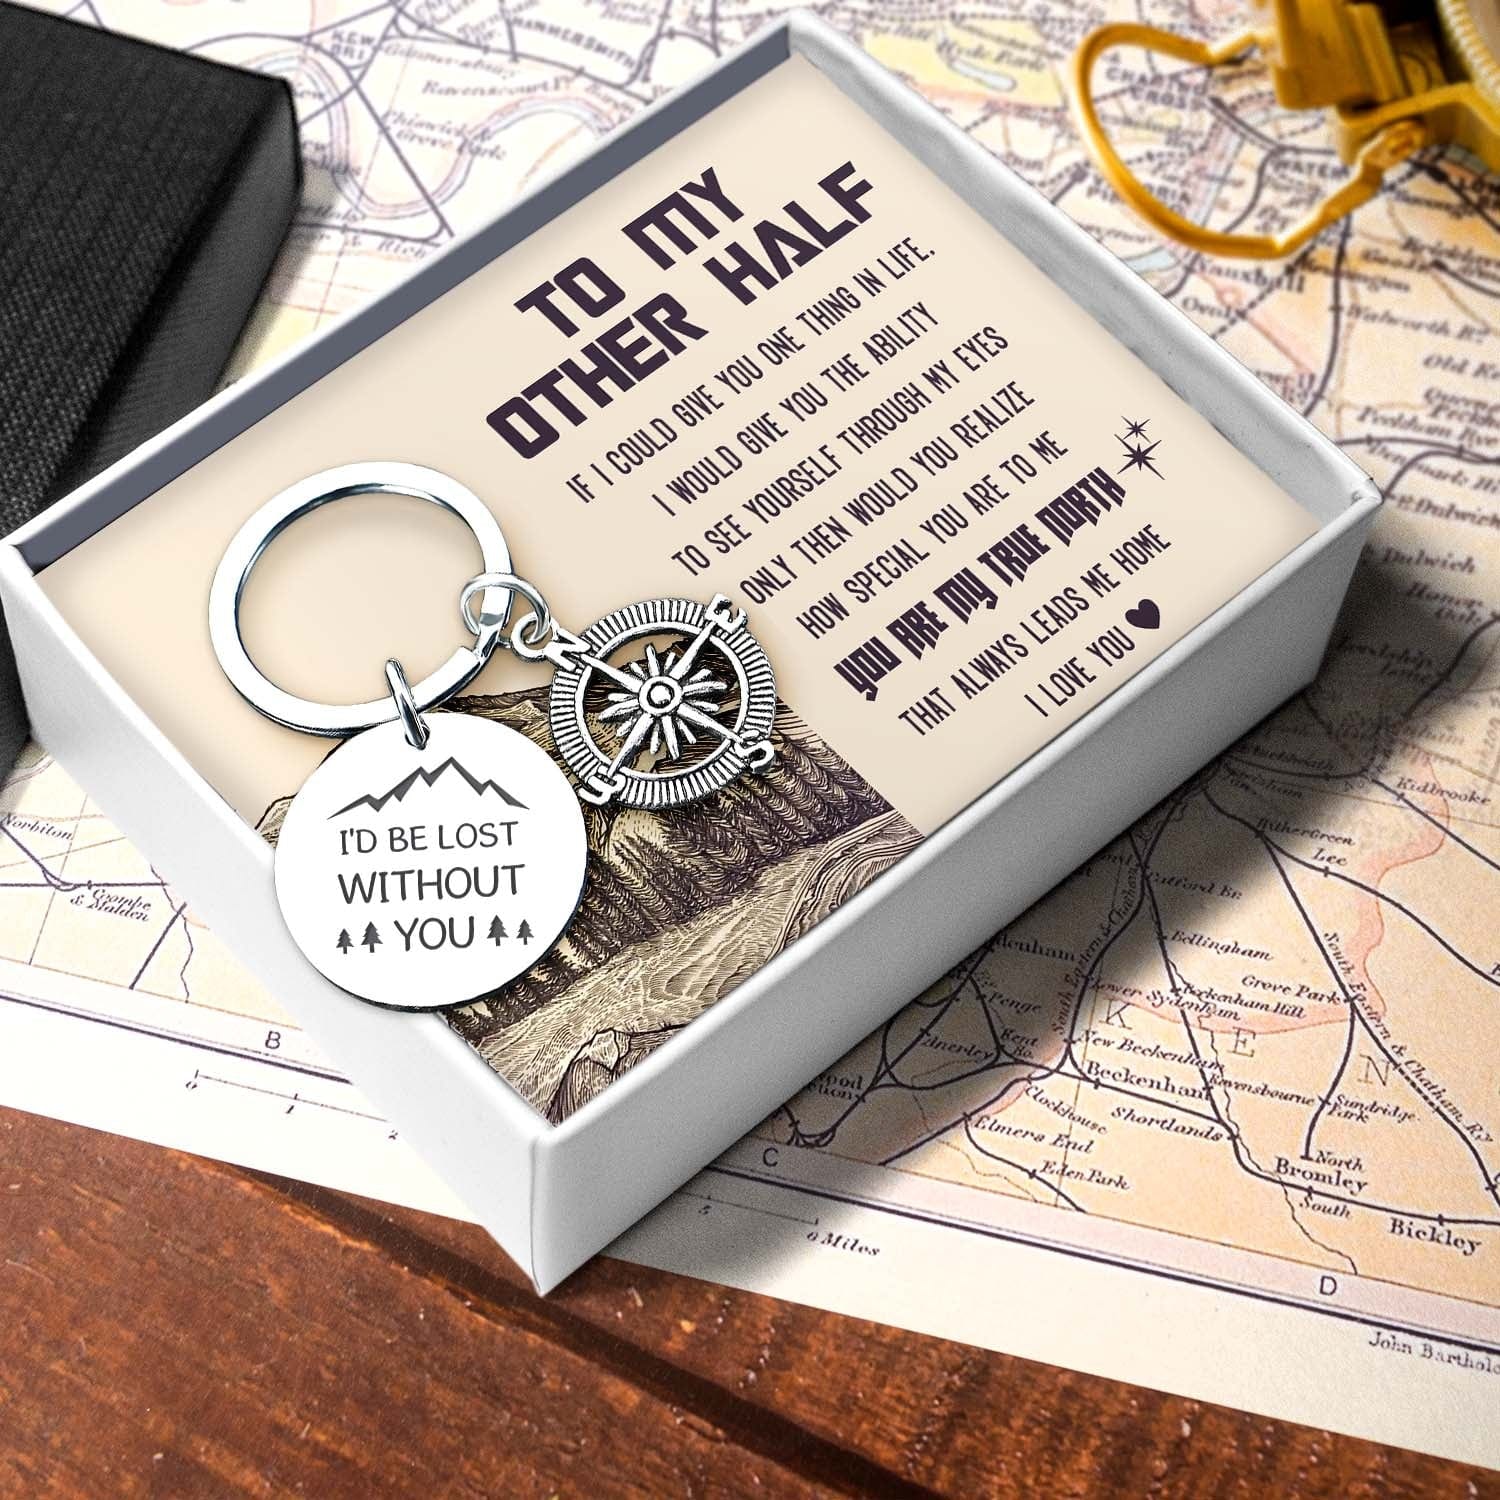 Compass Keychain - Travel - To My Man - You Are My True North - Gkw26023